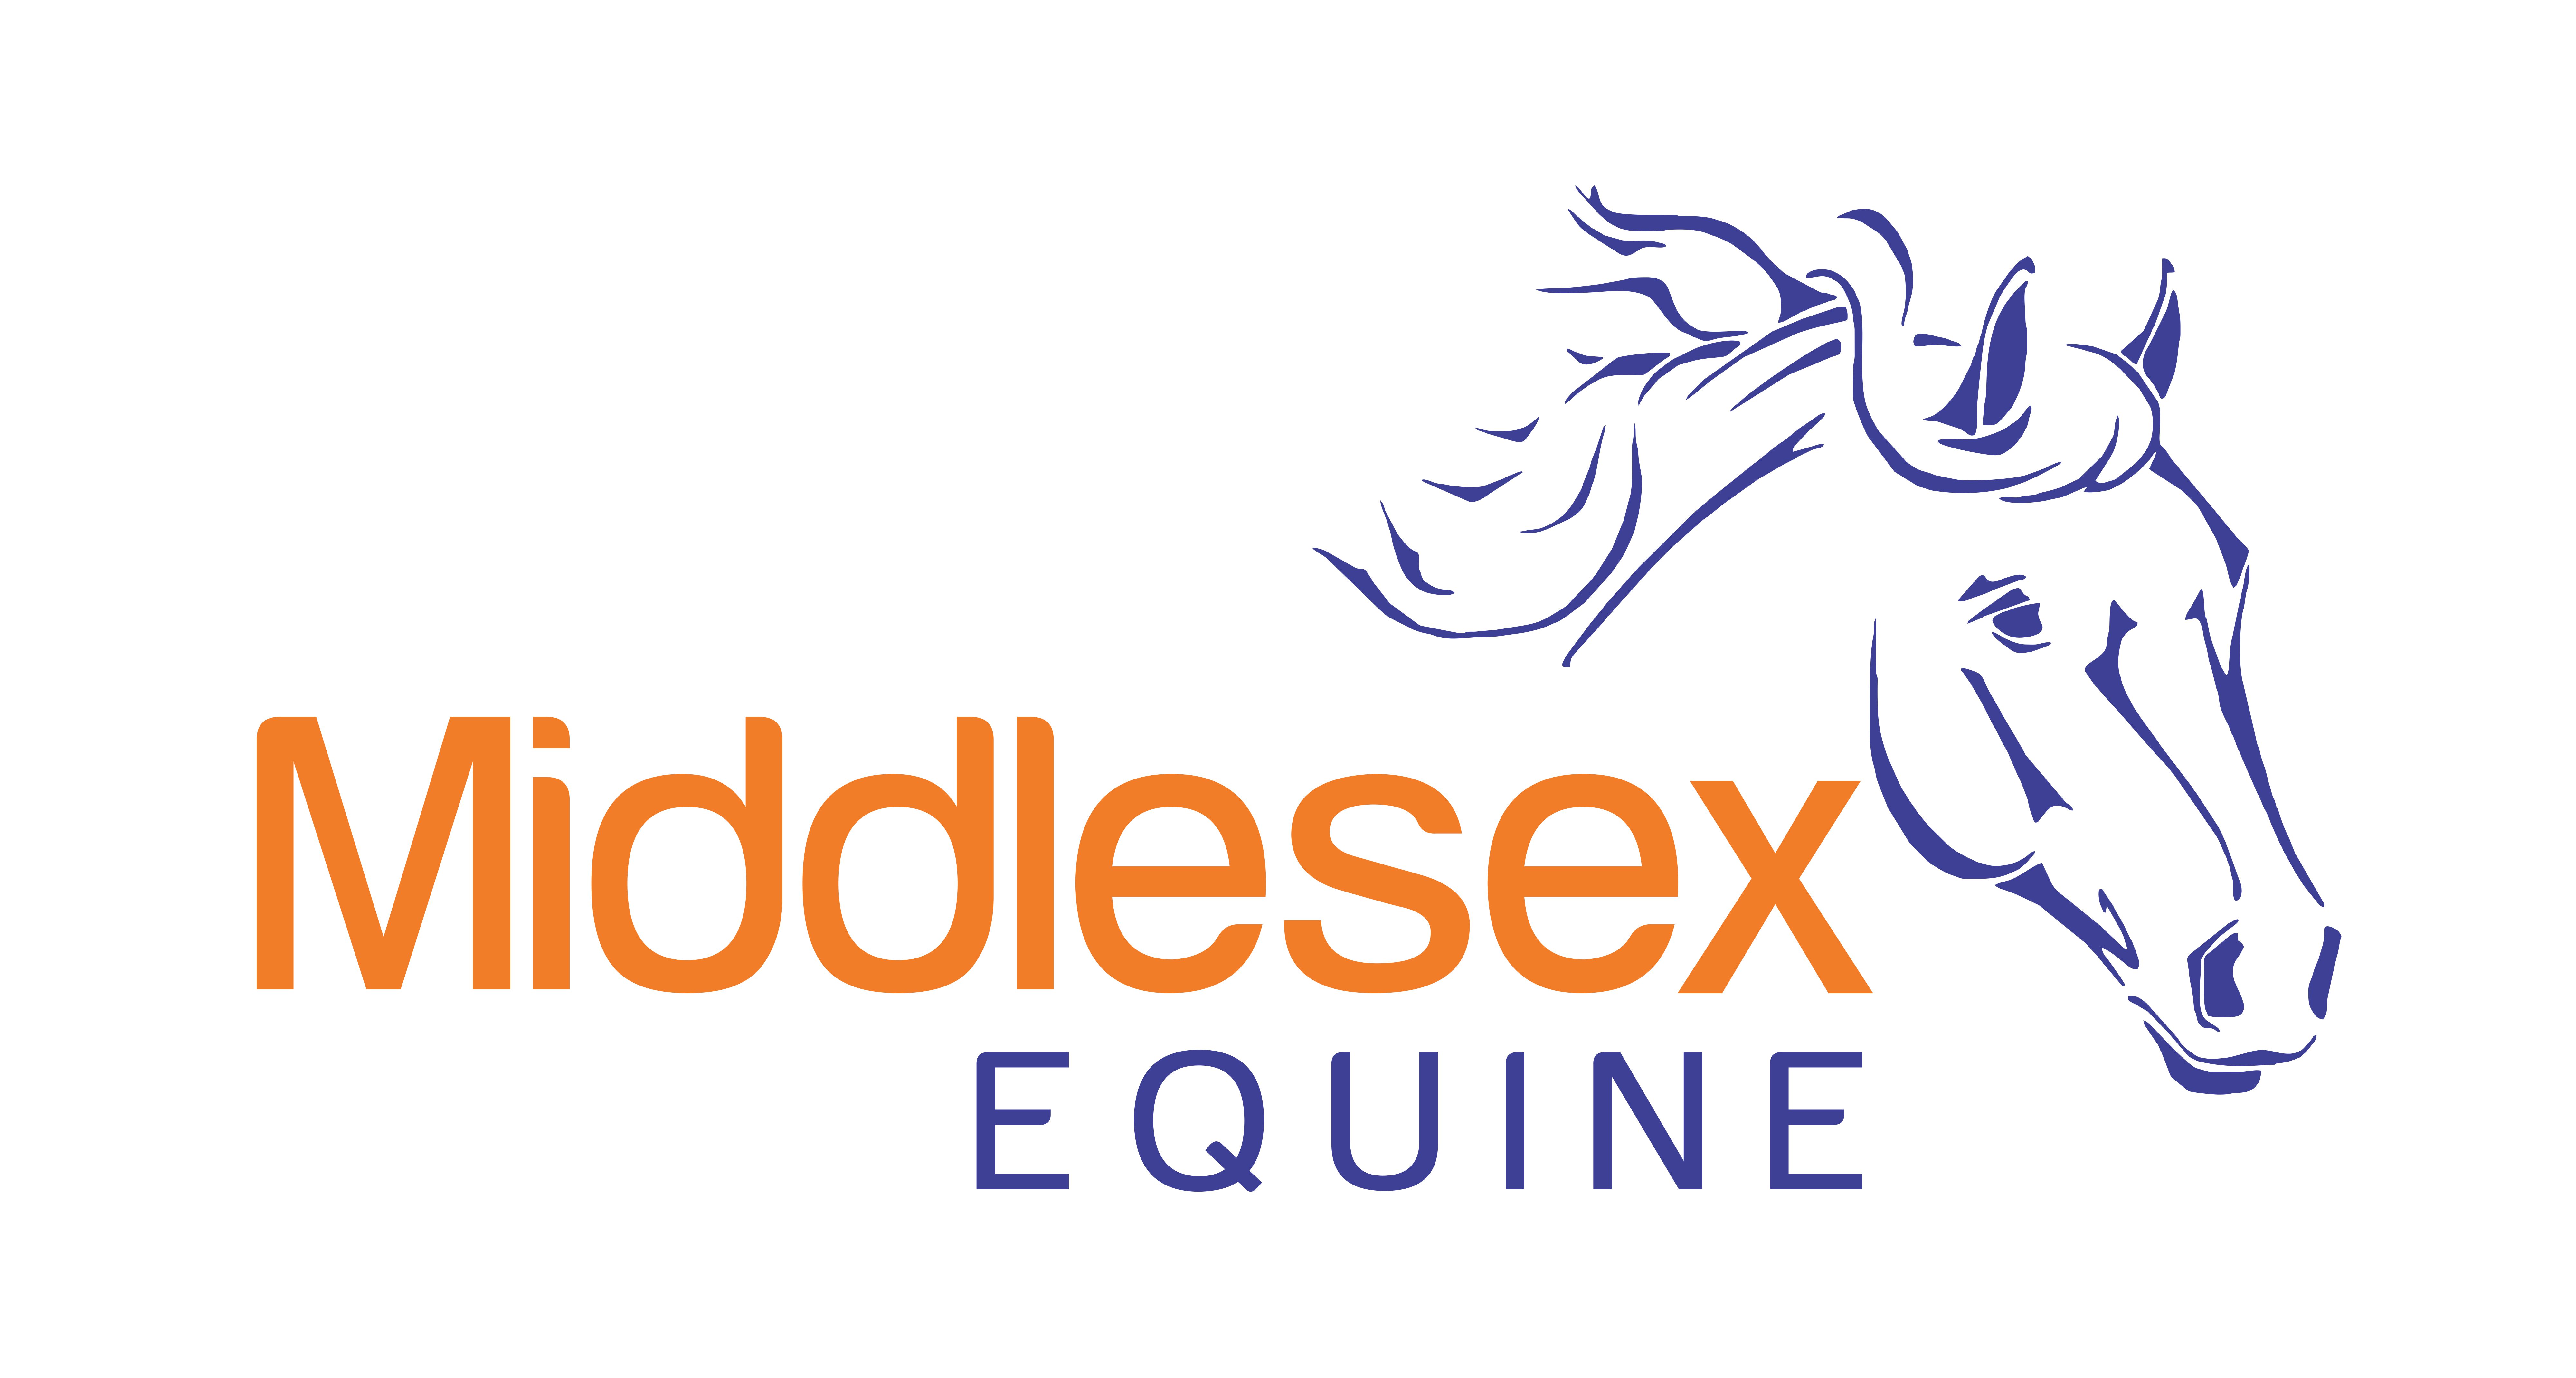 Middlesex Equine